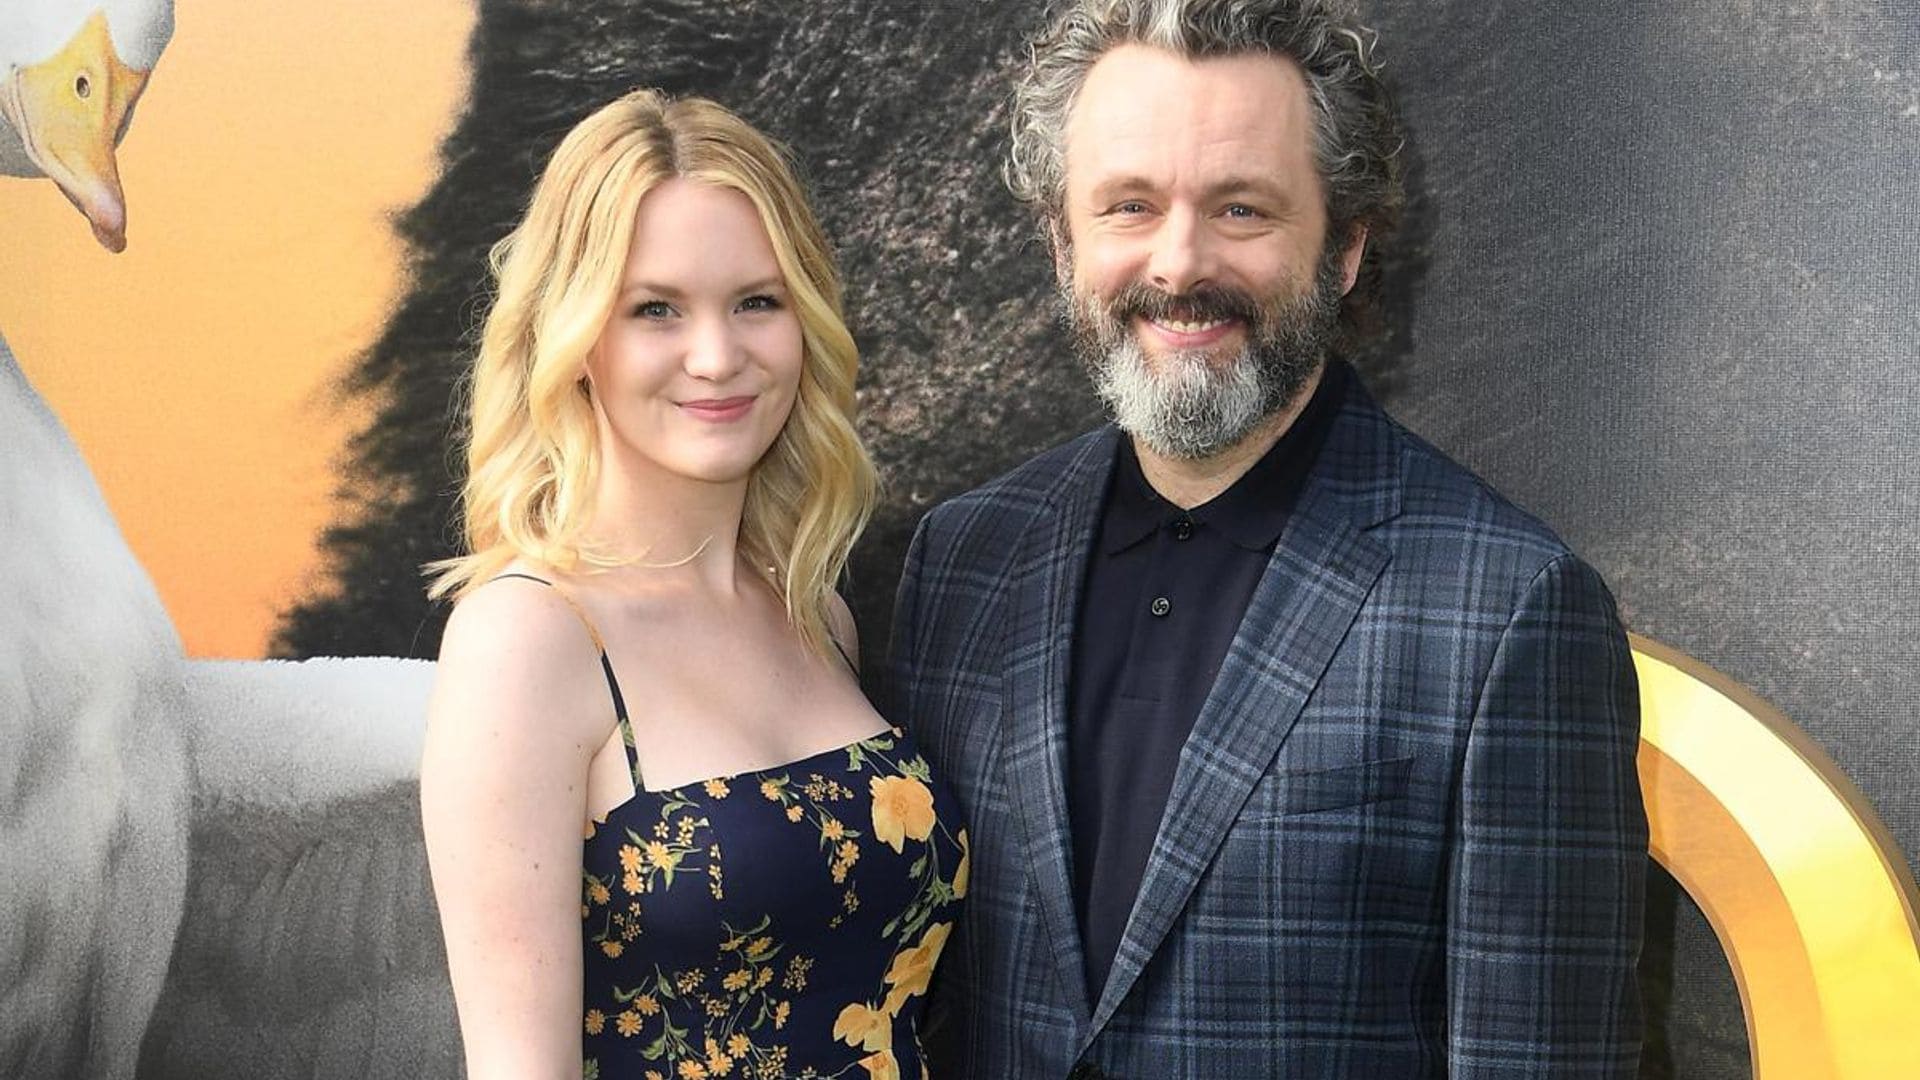 Michael Sheen and girlfriend Anna Lundberg are expecting their second baby together!